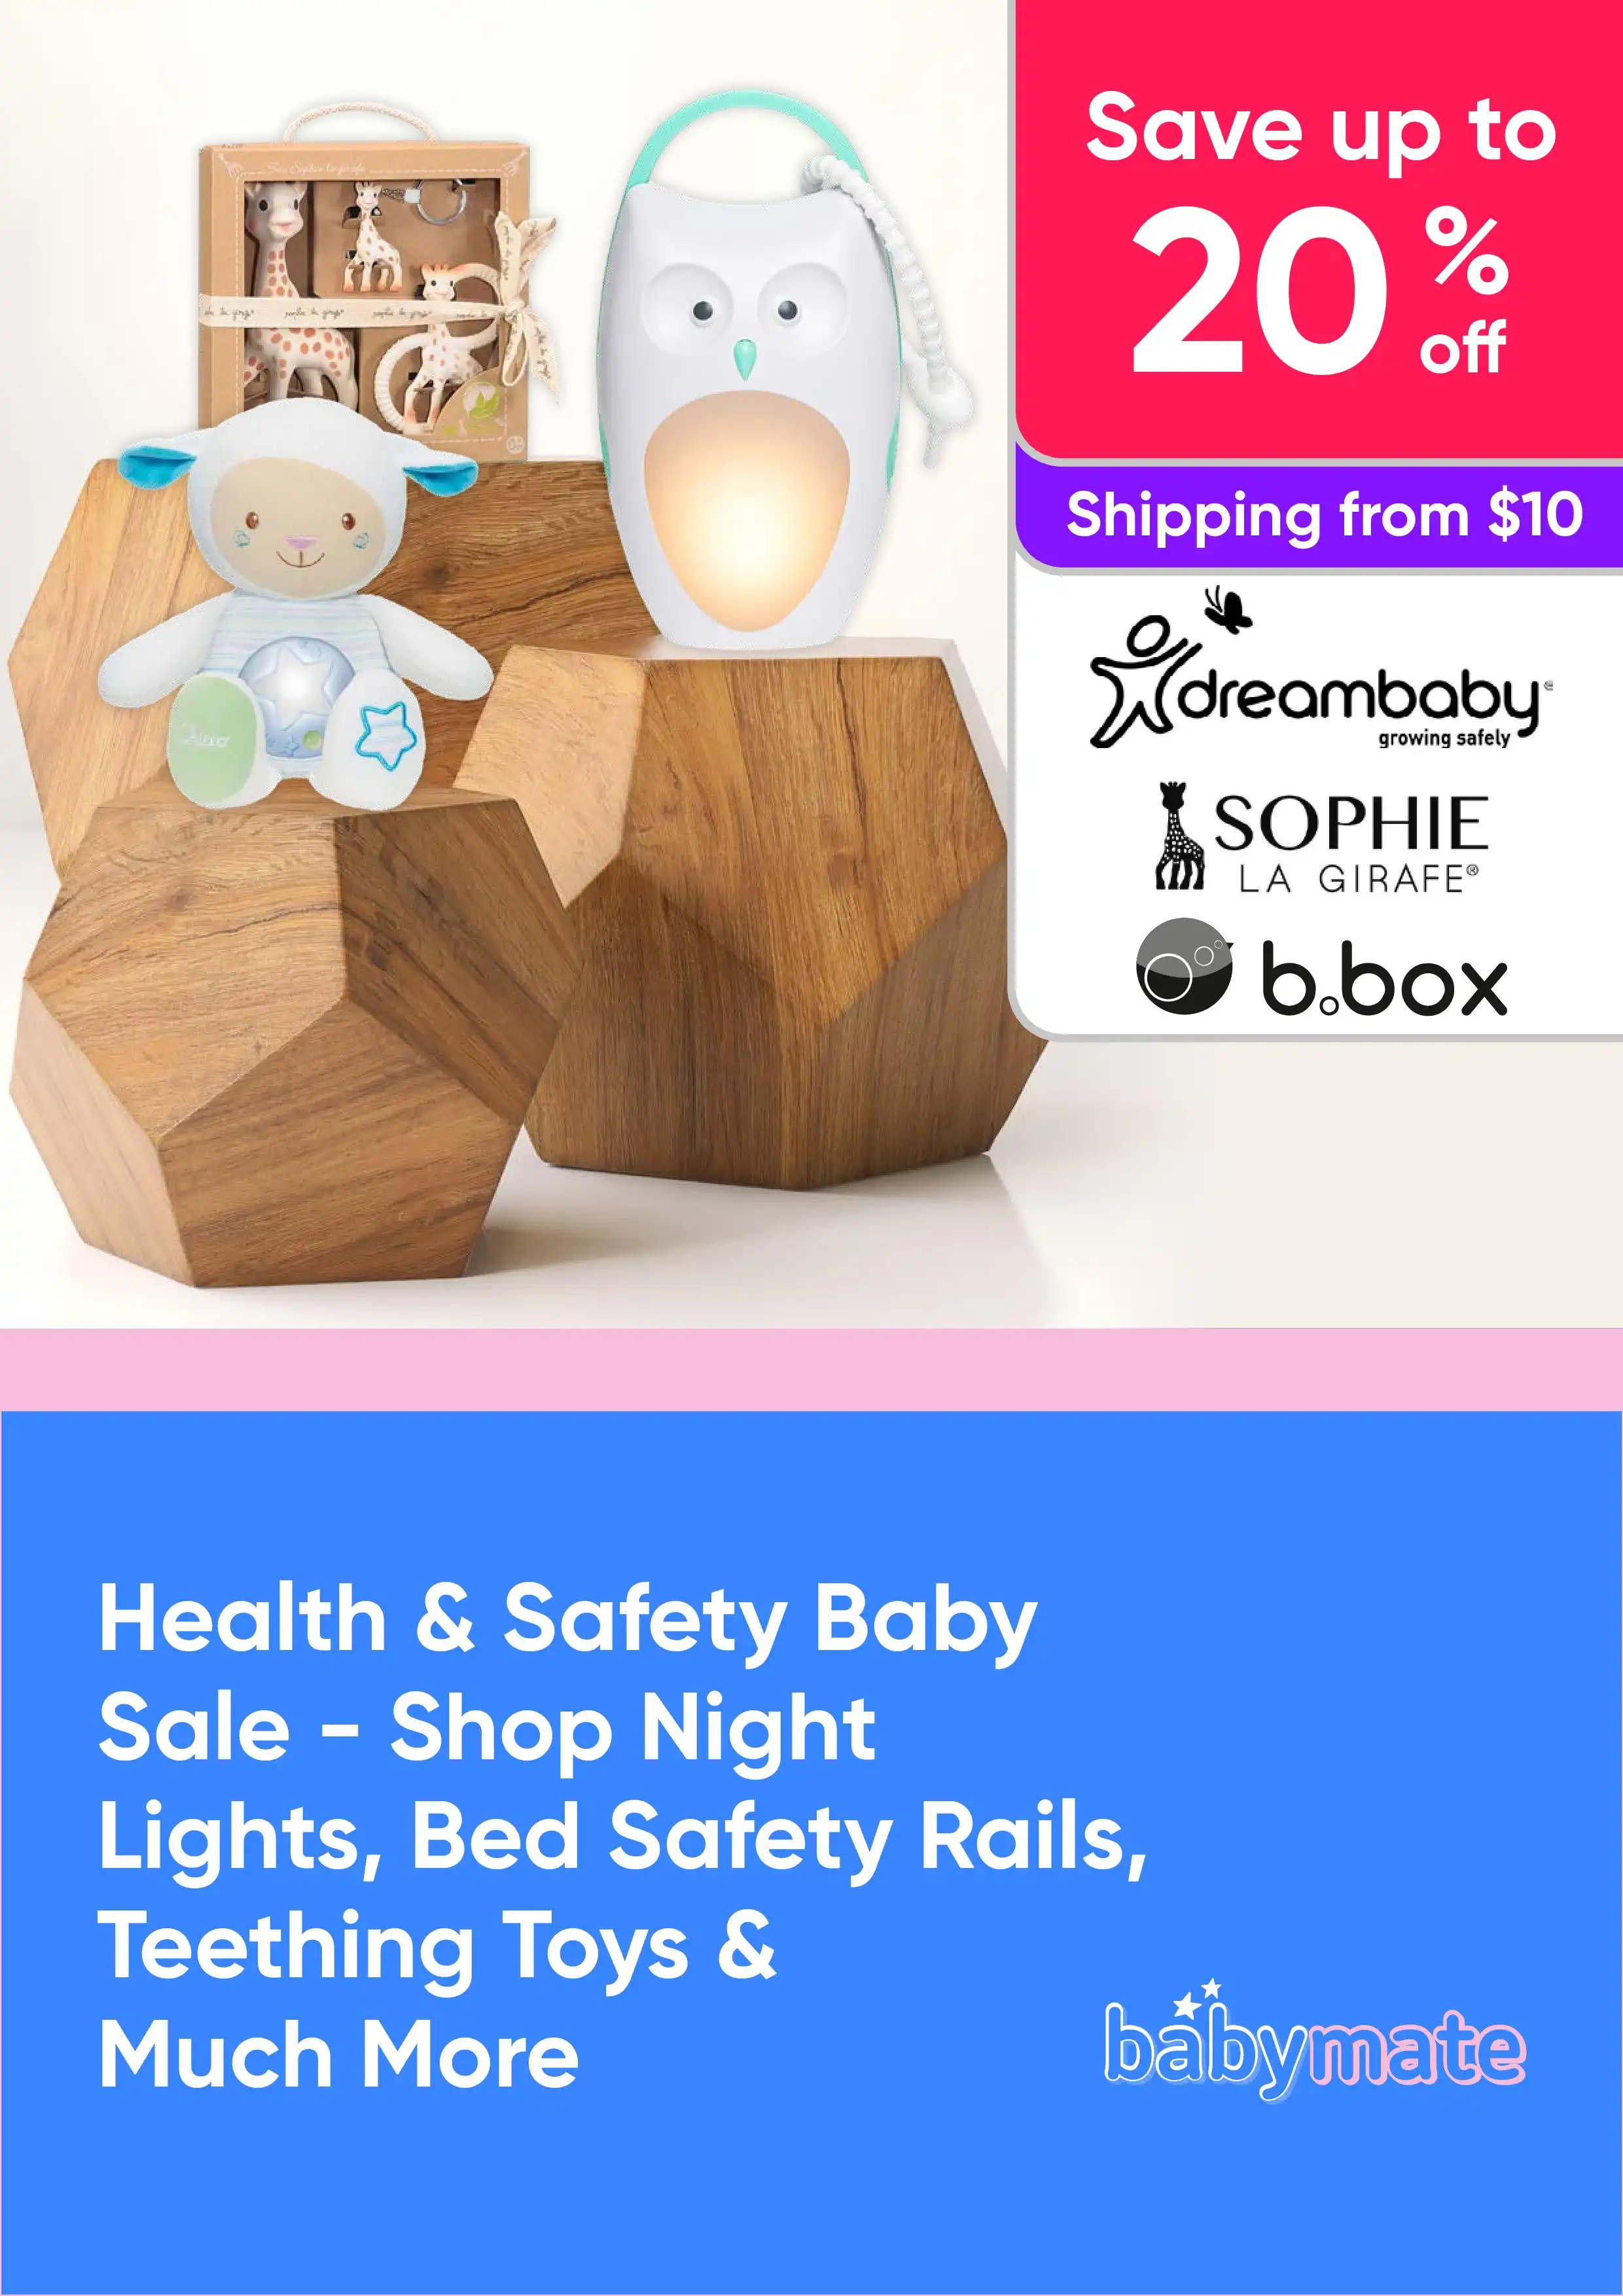 Health & Safety Baby Sale - Shop Night Lights, Bed Safety Rails, Teething Toys